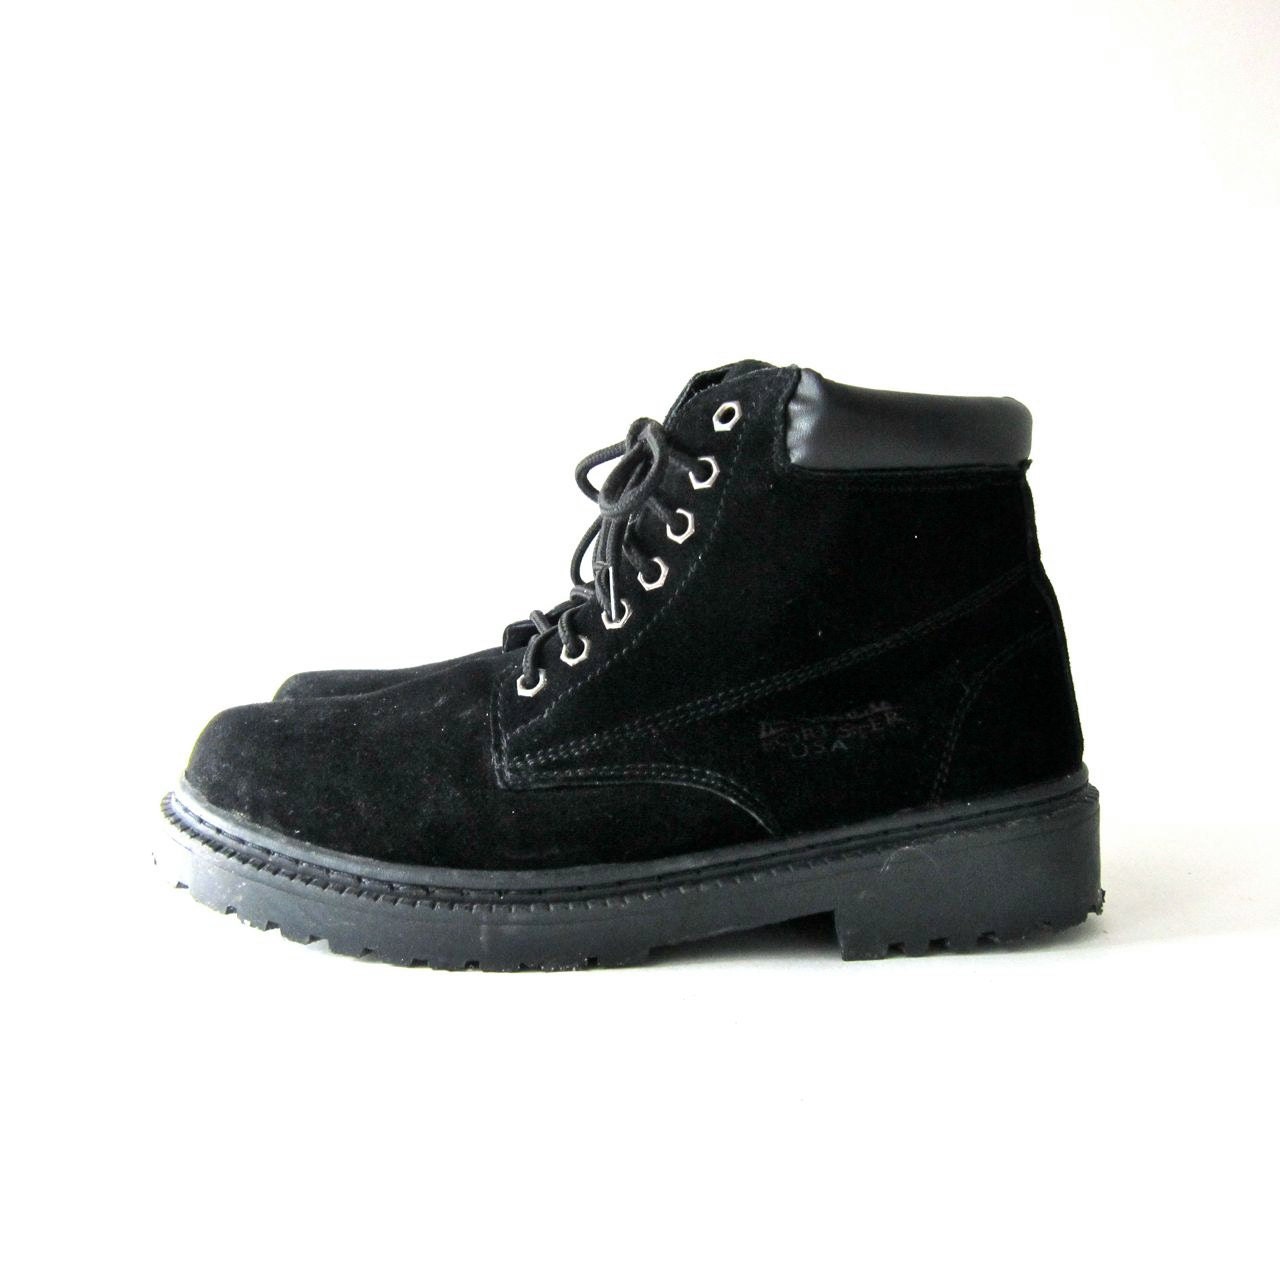 Vintage black suede ankle boots. Leather mountain boots. Chunky Hiking ...